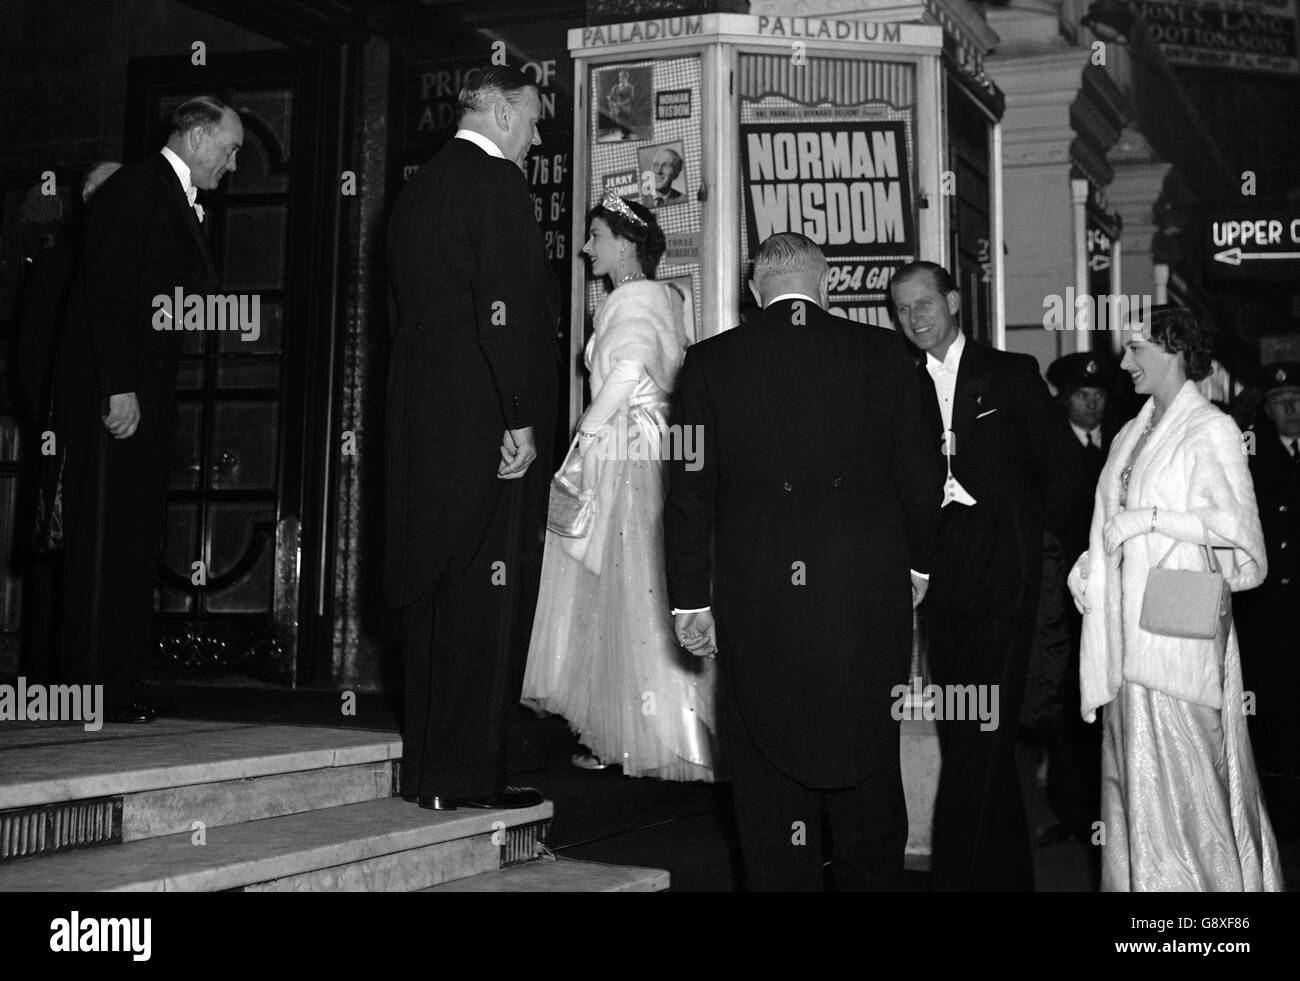 Royal variety performance Black and White Stock Photos & Images - Alamy